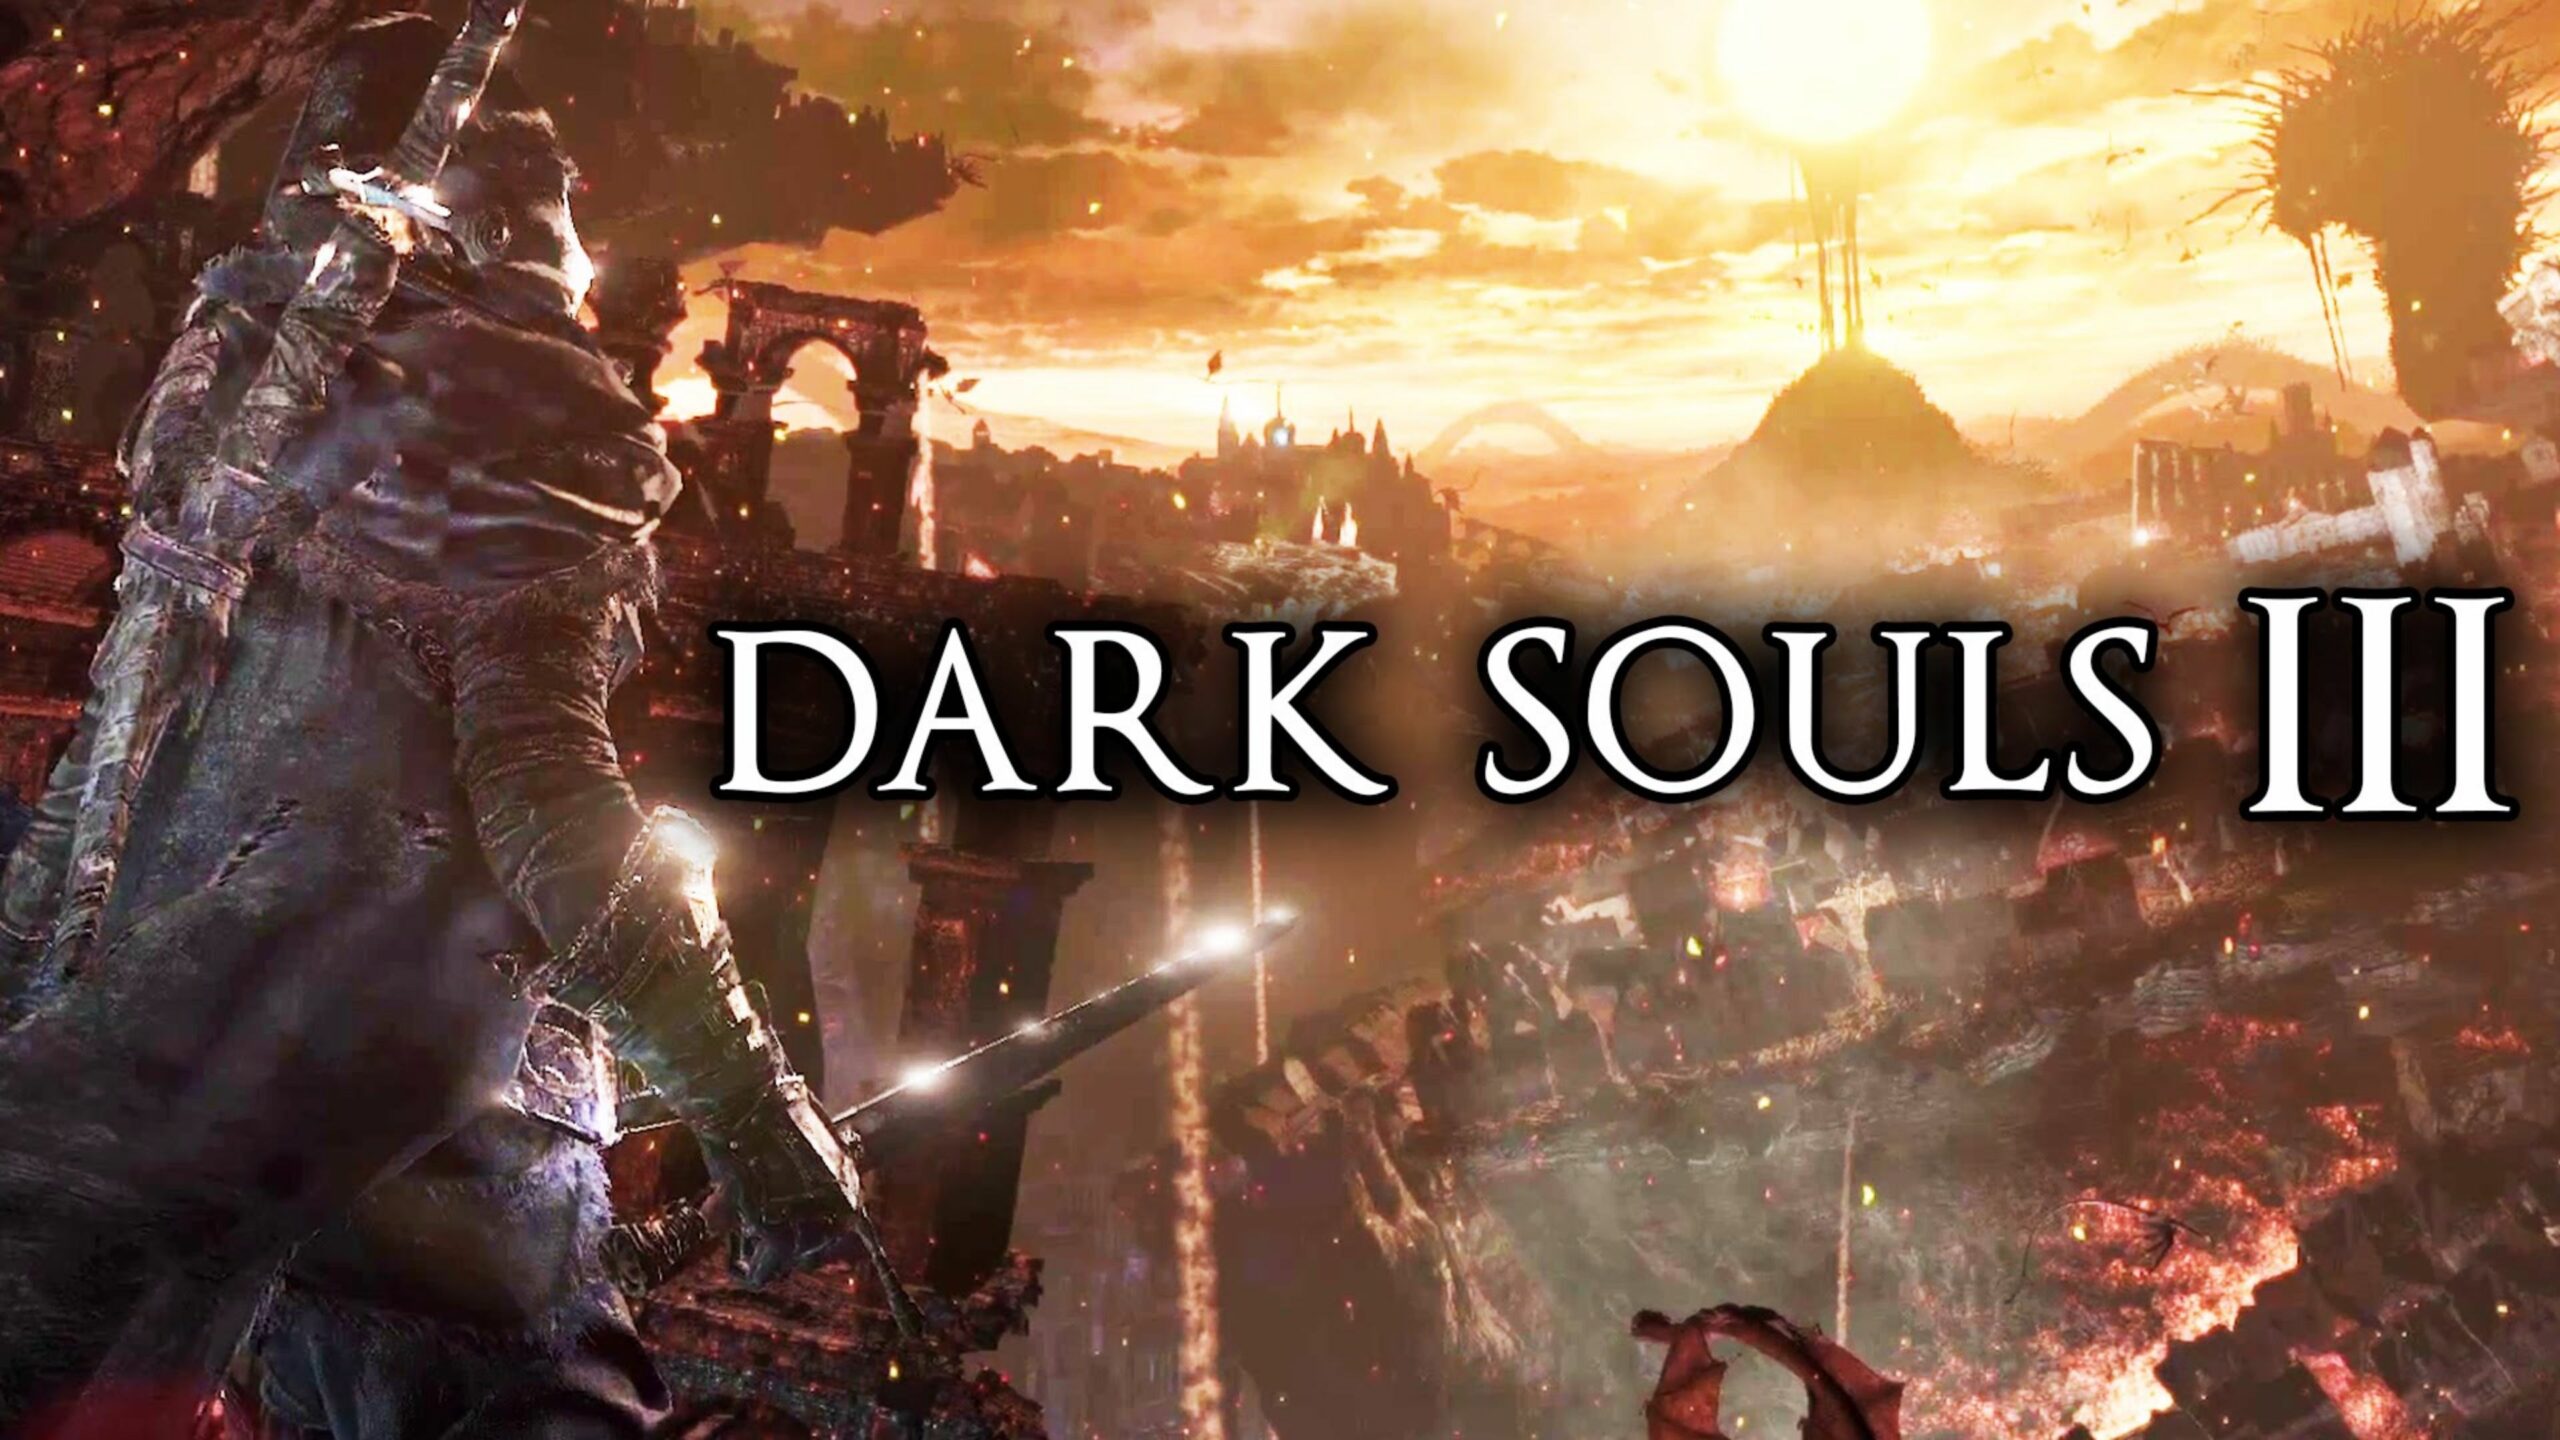 Official Dark Souls III PC Game Latest Edition Download Now